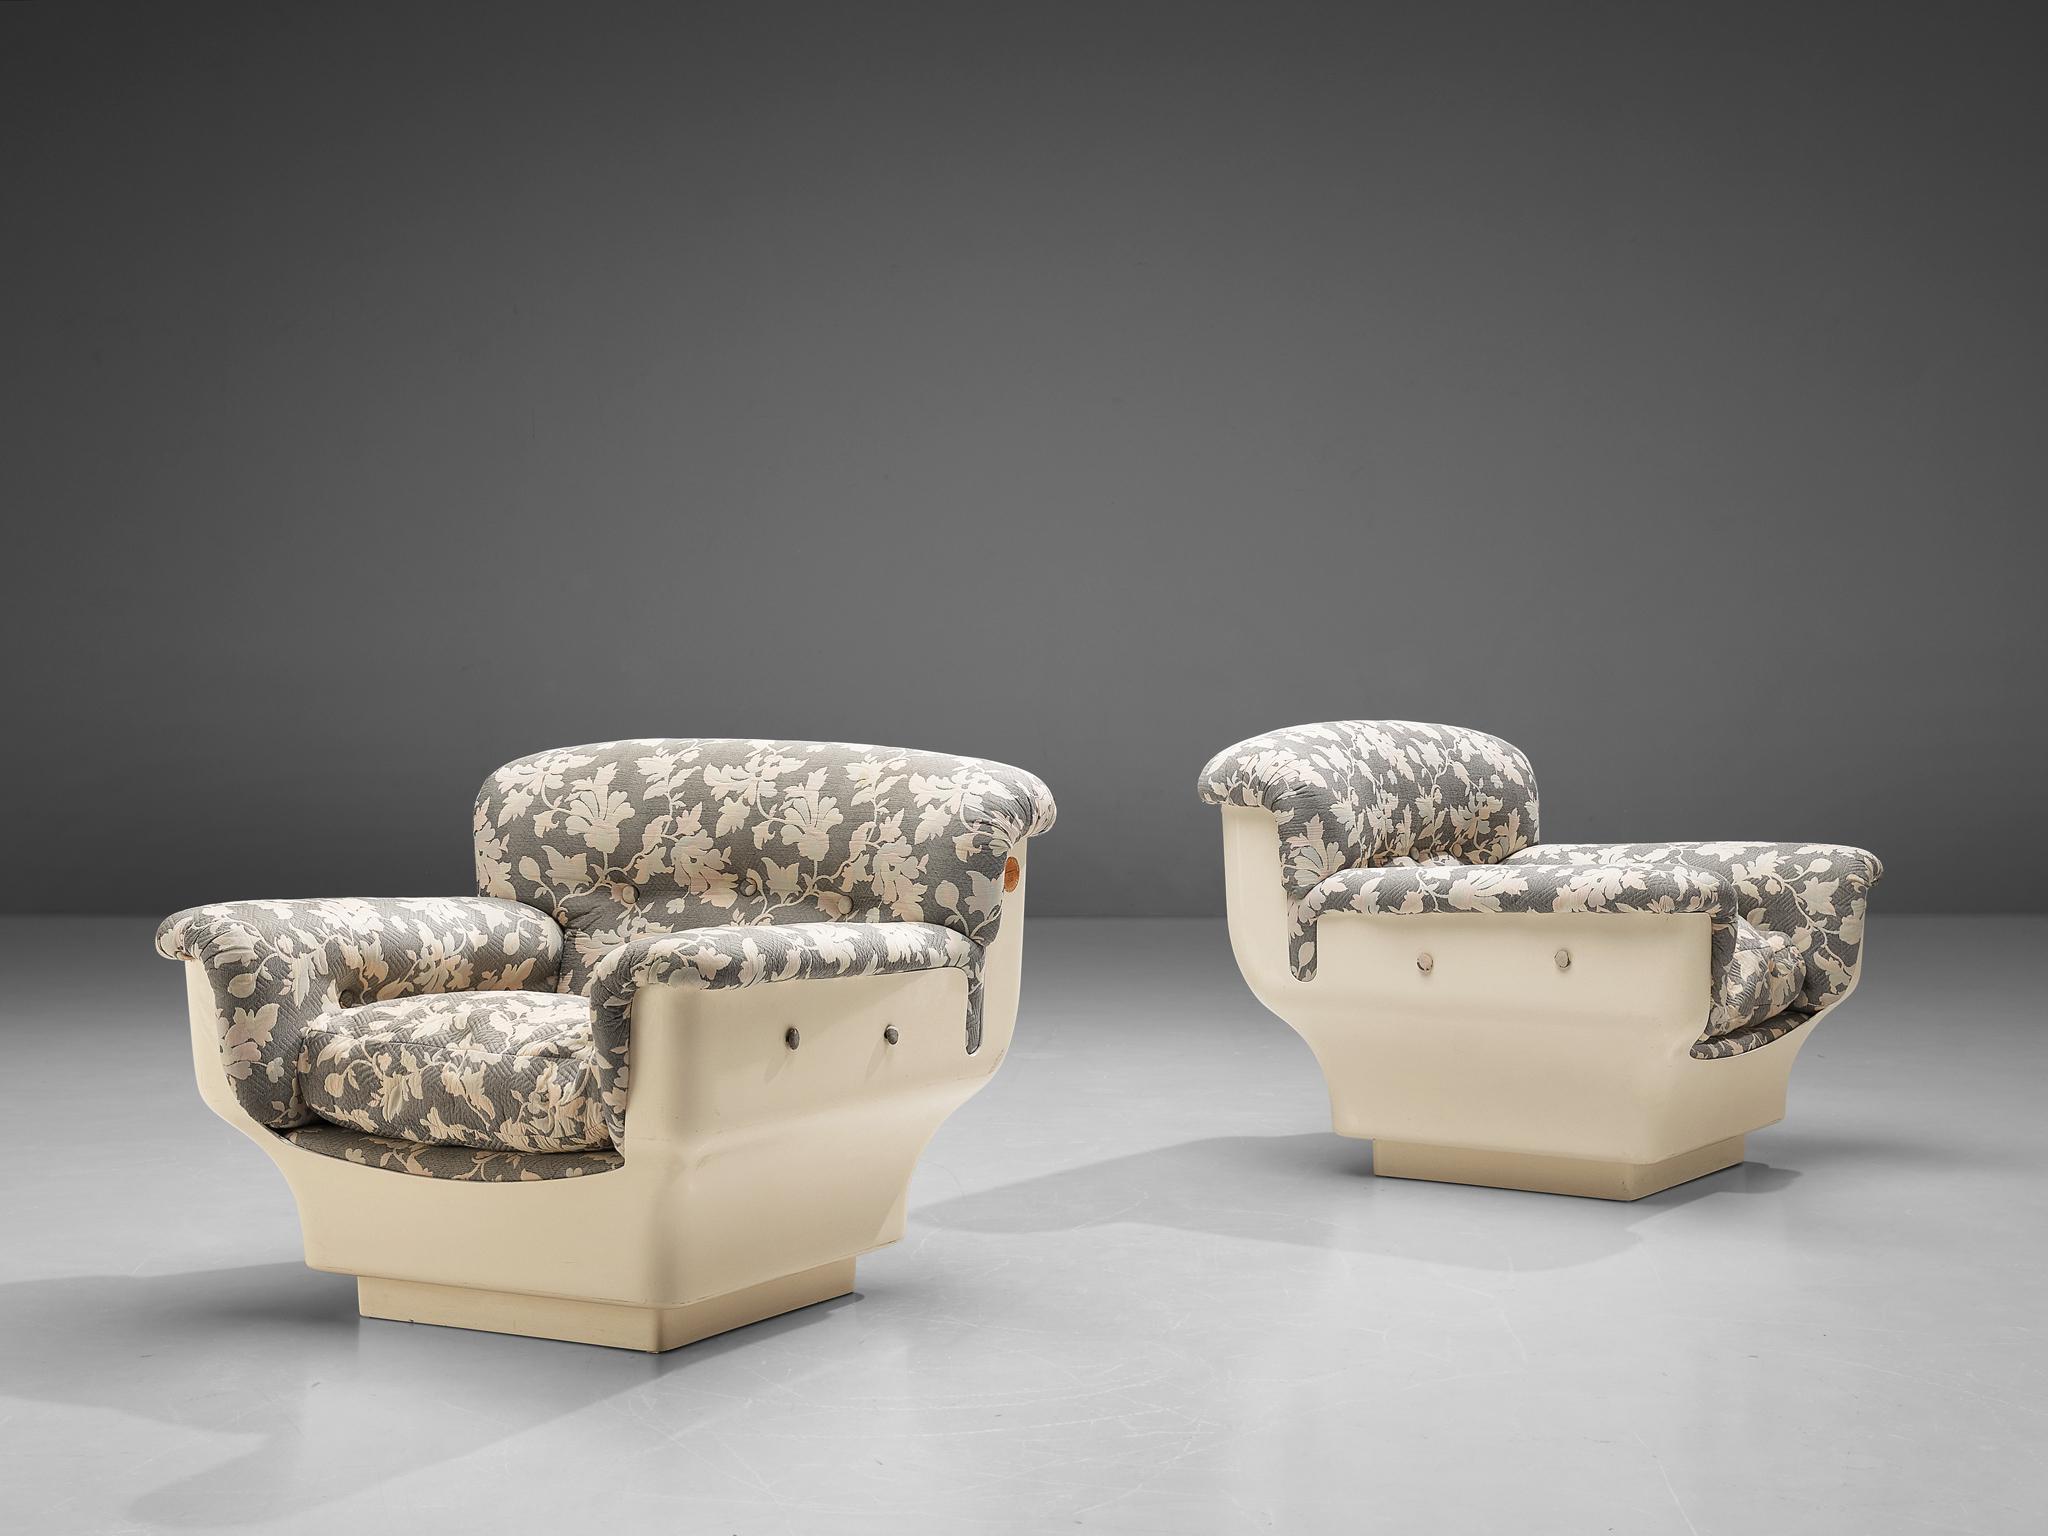 Studio Tecnico for Mobilquattro, ‘Delta 699’ lounge chairs, fabric, fiberglass, Italy, 1970s

‘Delta 699’ chairs designed by Studio Tecnico and G.G. Biemme for Mobilquattro. These postmodern chairs are very particular in their design due to the